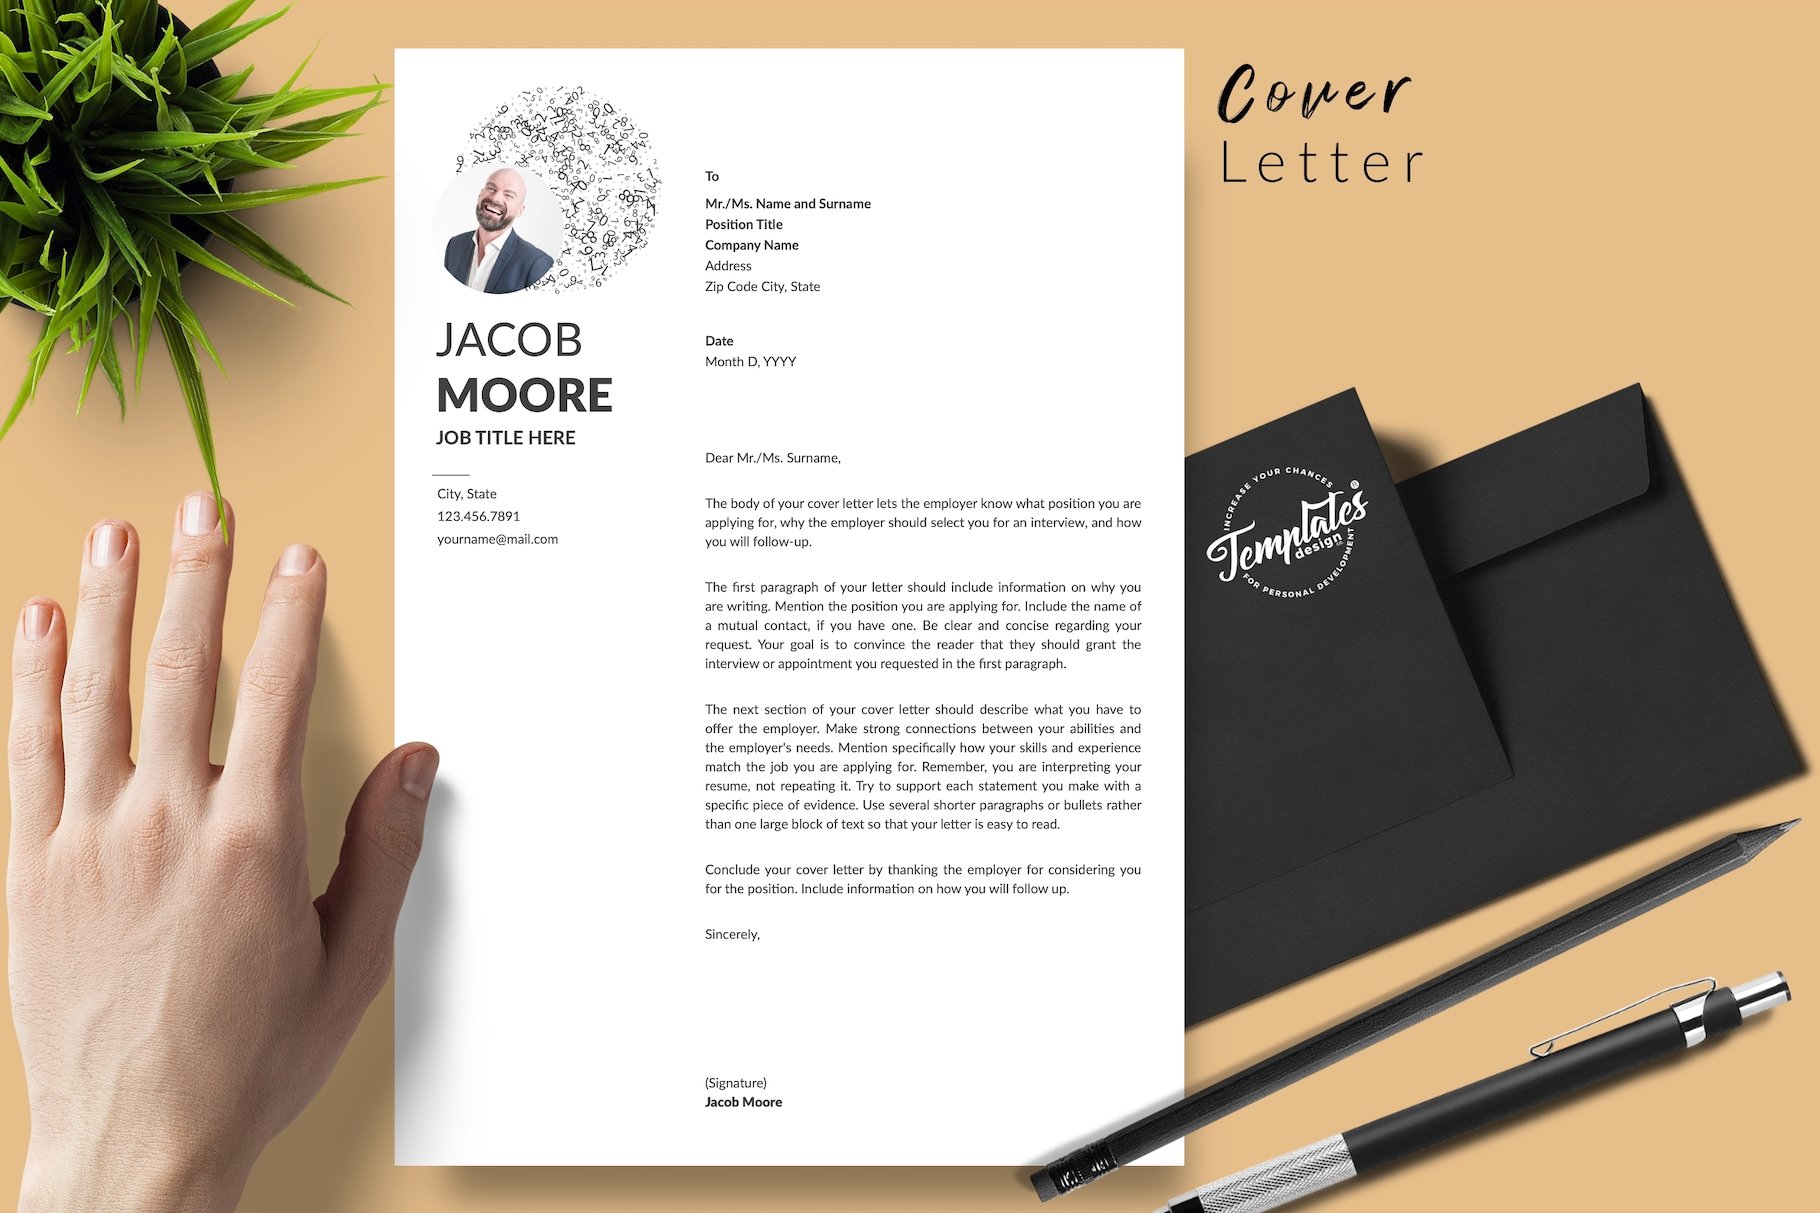 resume cv template jacob moore 282in1 special edition29 for creative market 05 cover letter white edition 138